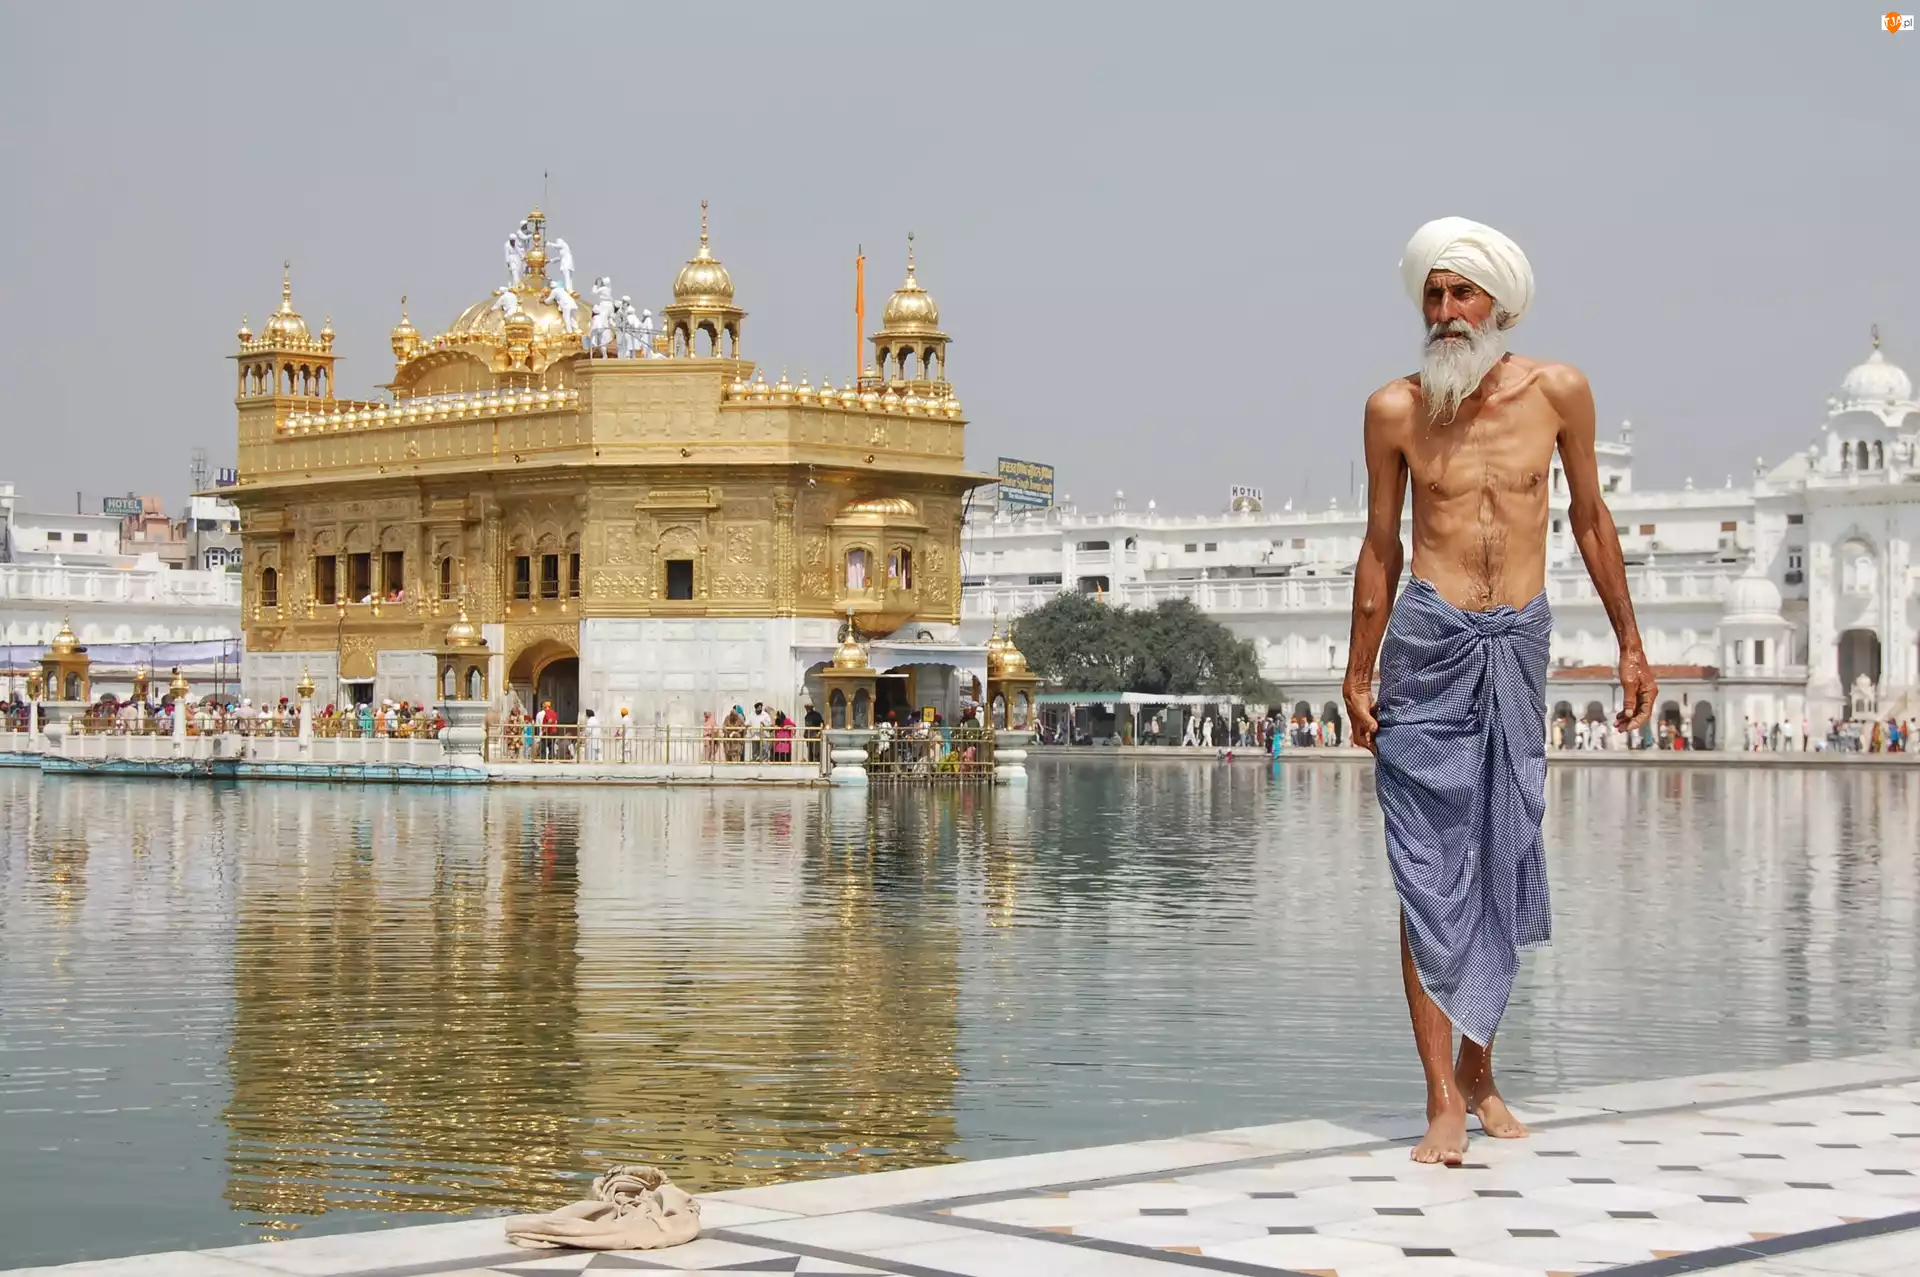 Indie, Golden Temple, Amritsar